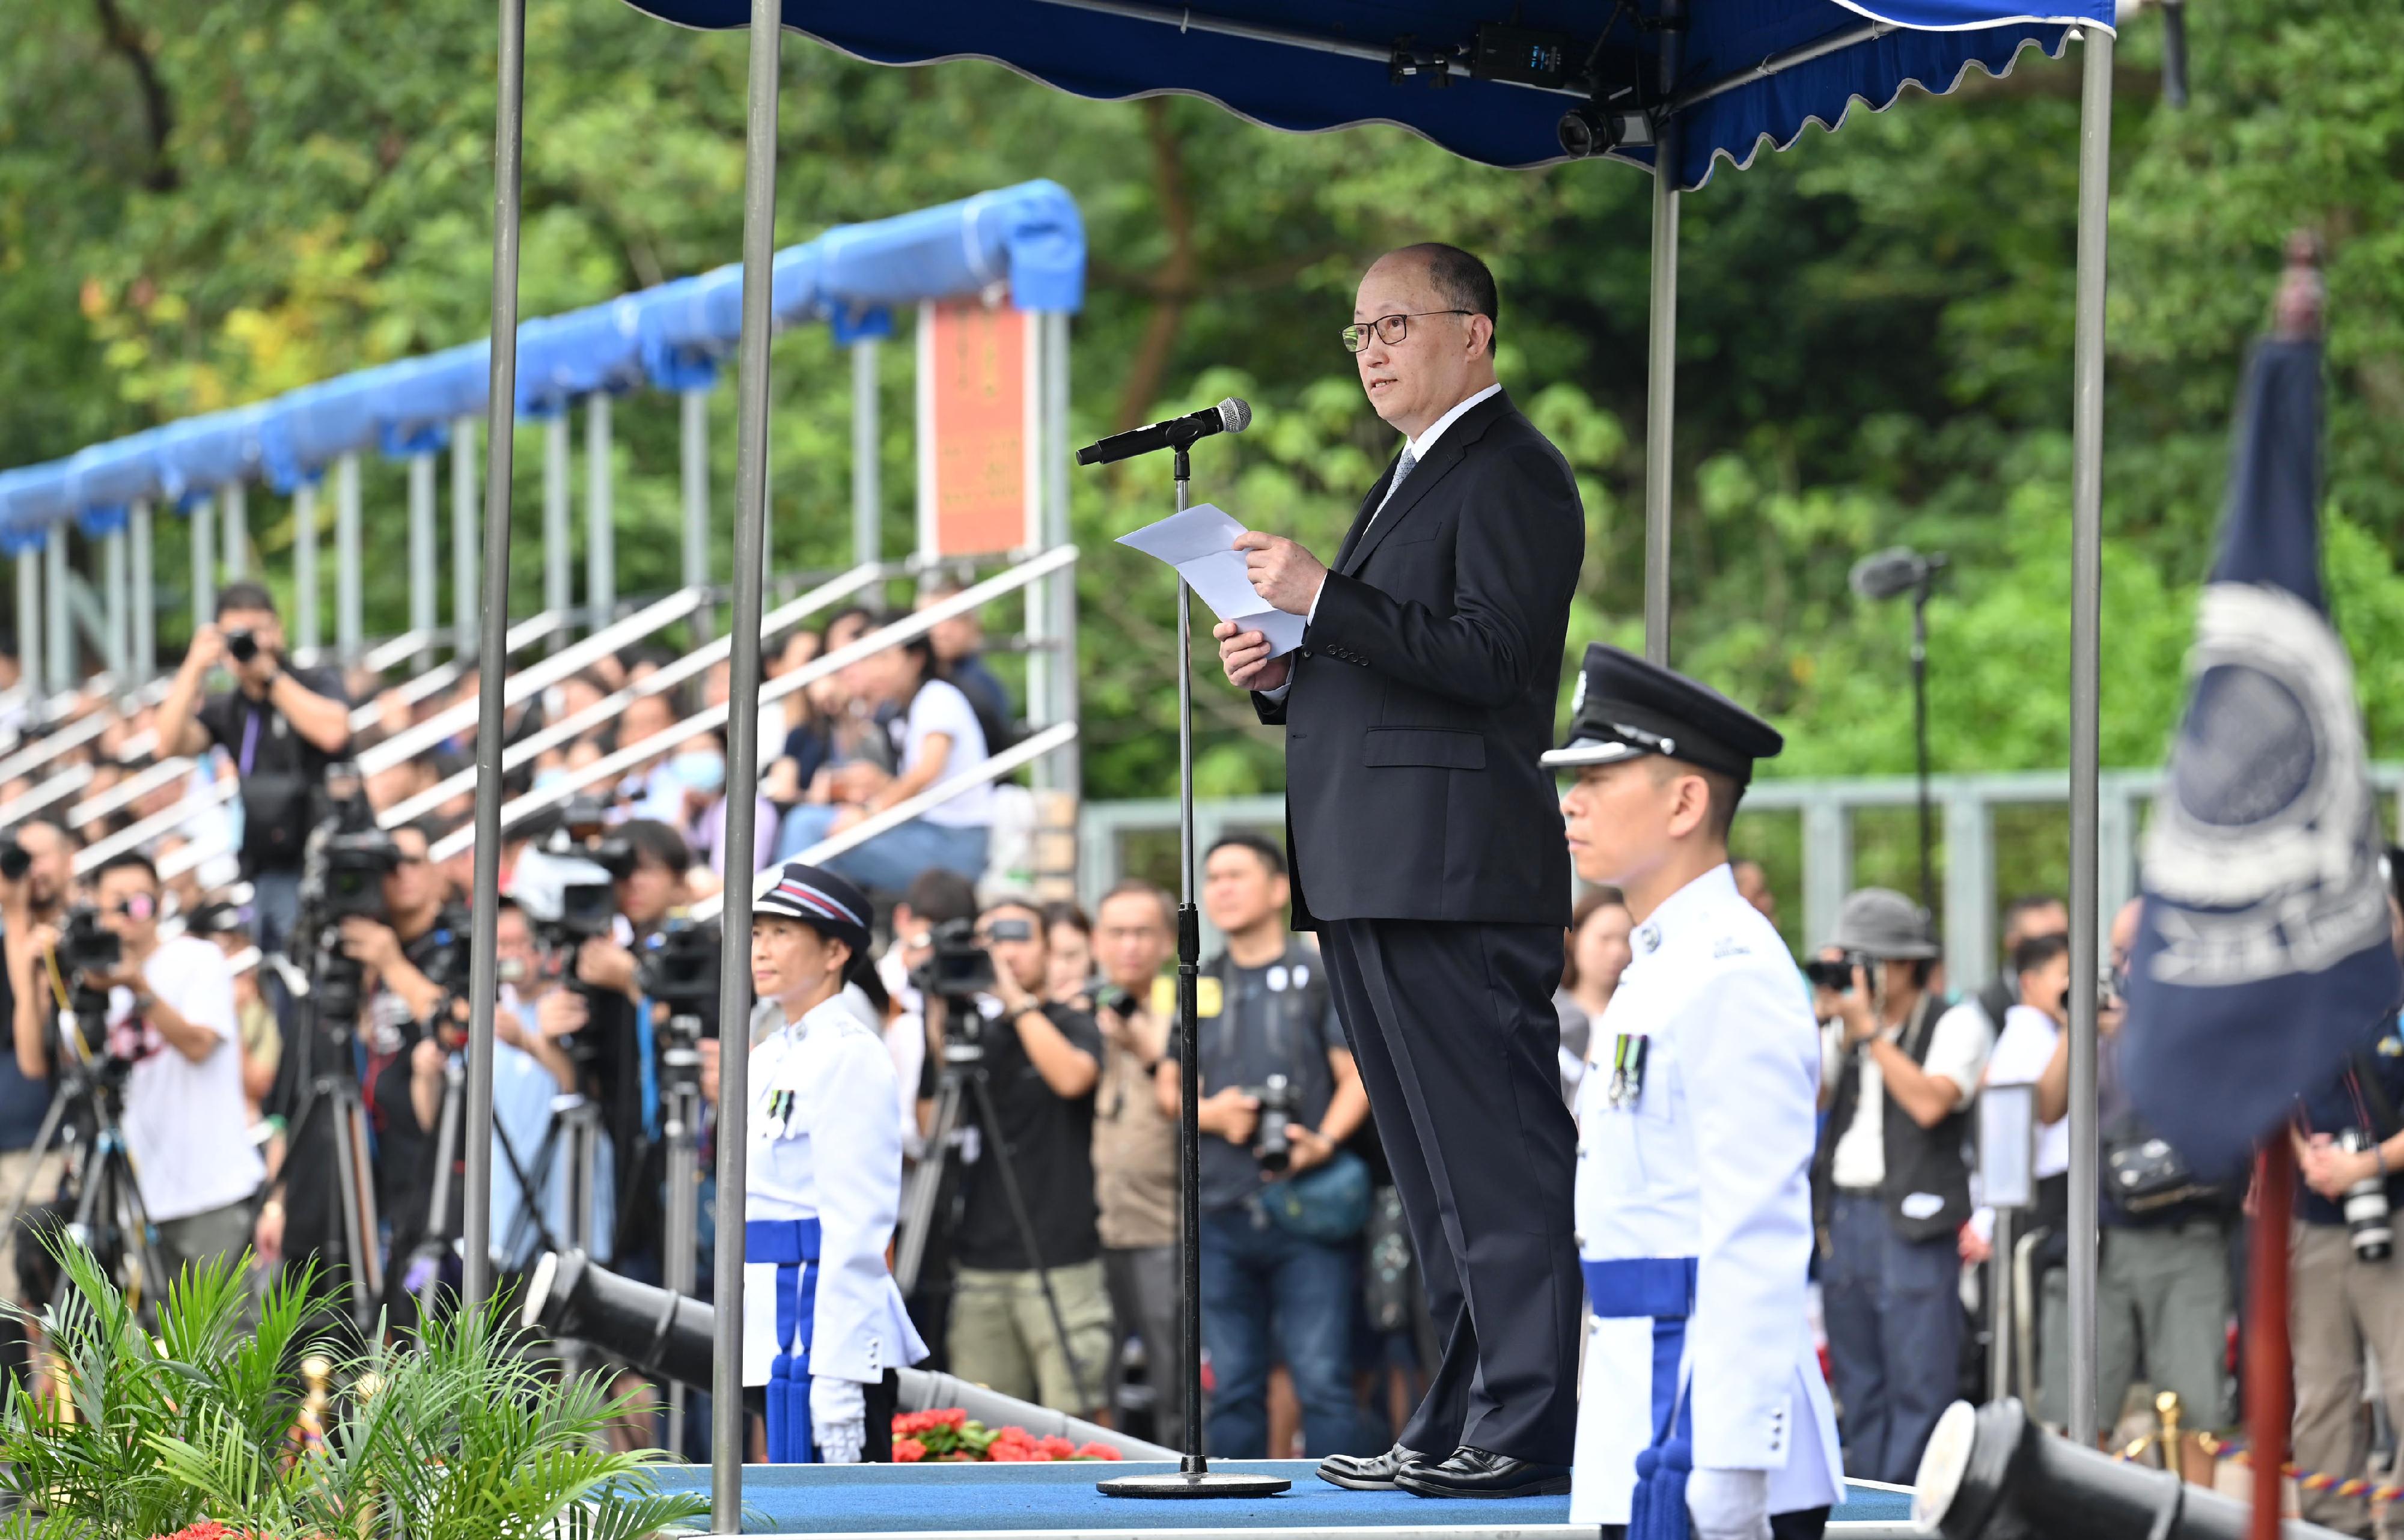 The Director of the Liaison Office of the Central People's Government in the Hong Kong Special Administrative Region, Mr Zheng Yanxiong, speaks at a passing-out parade held at the Hong Kong Police College today (September 16).